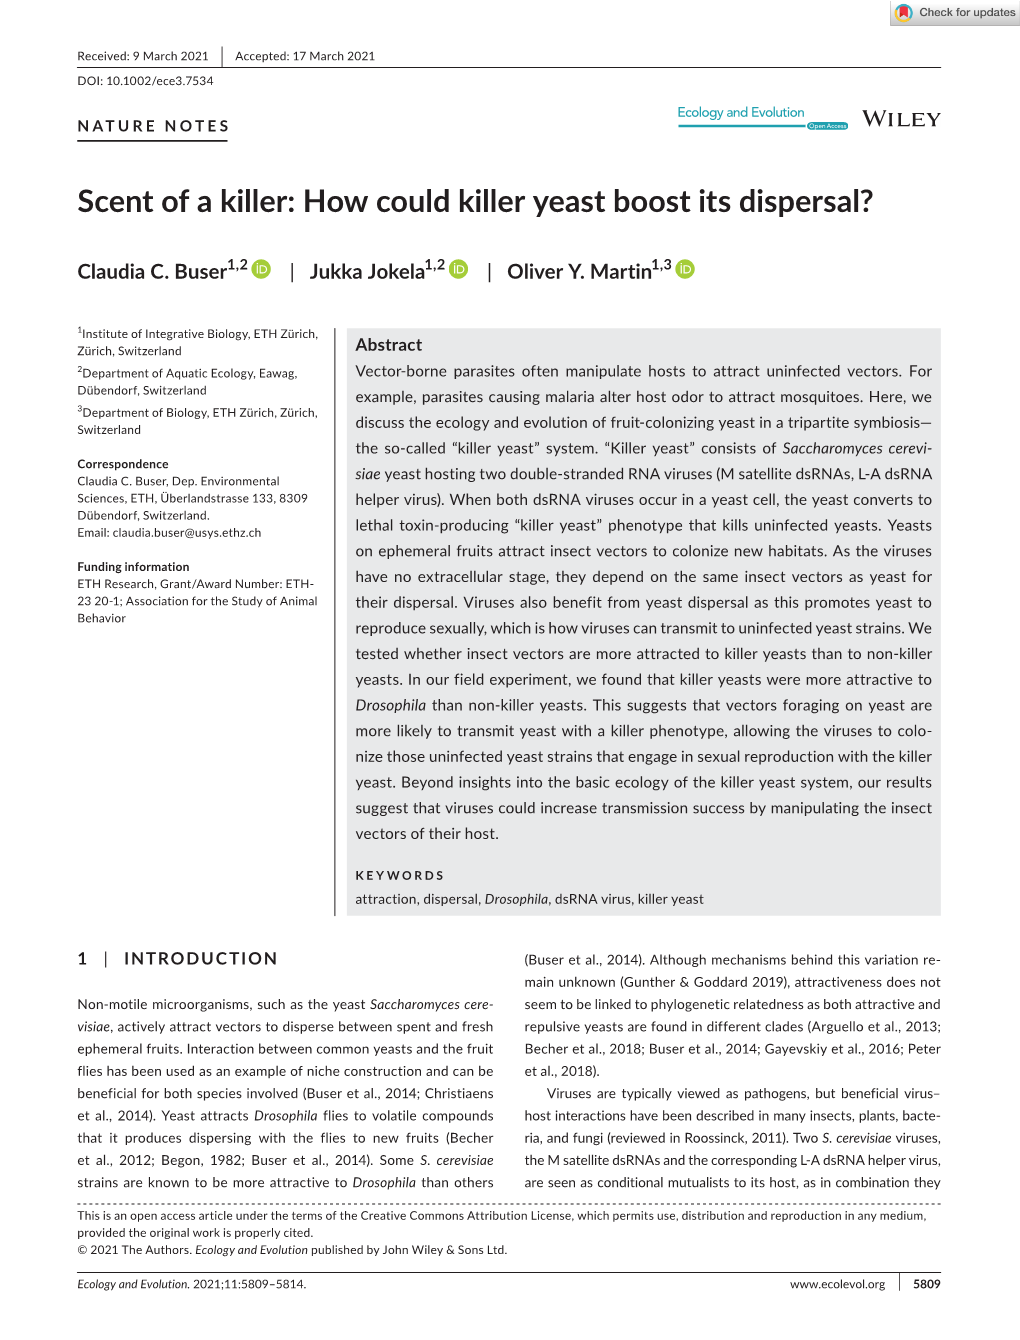 Scent of a Killer: How Could Killer Yeast Boost Its Dispersal?